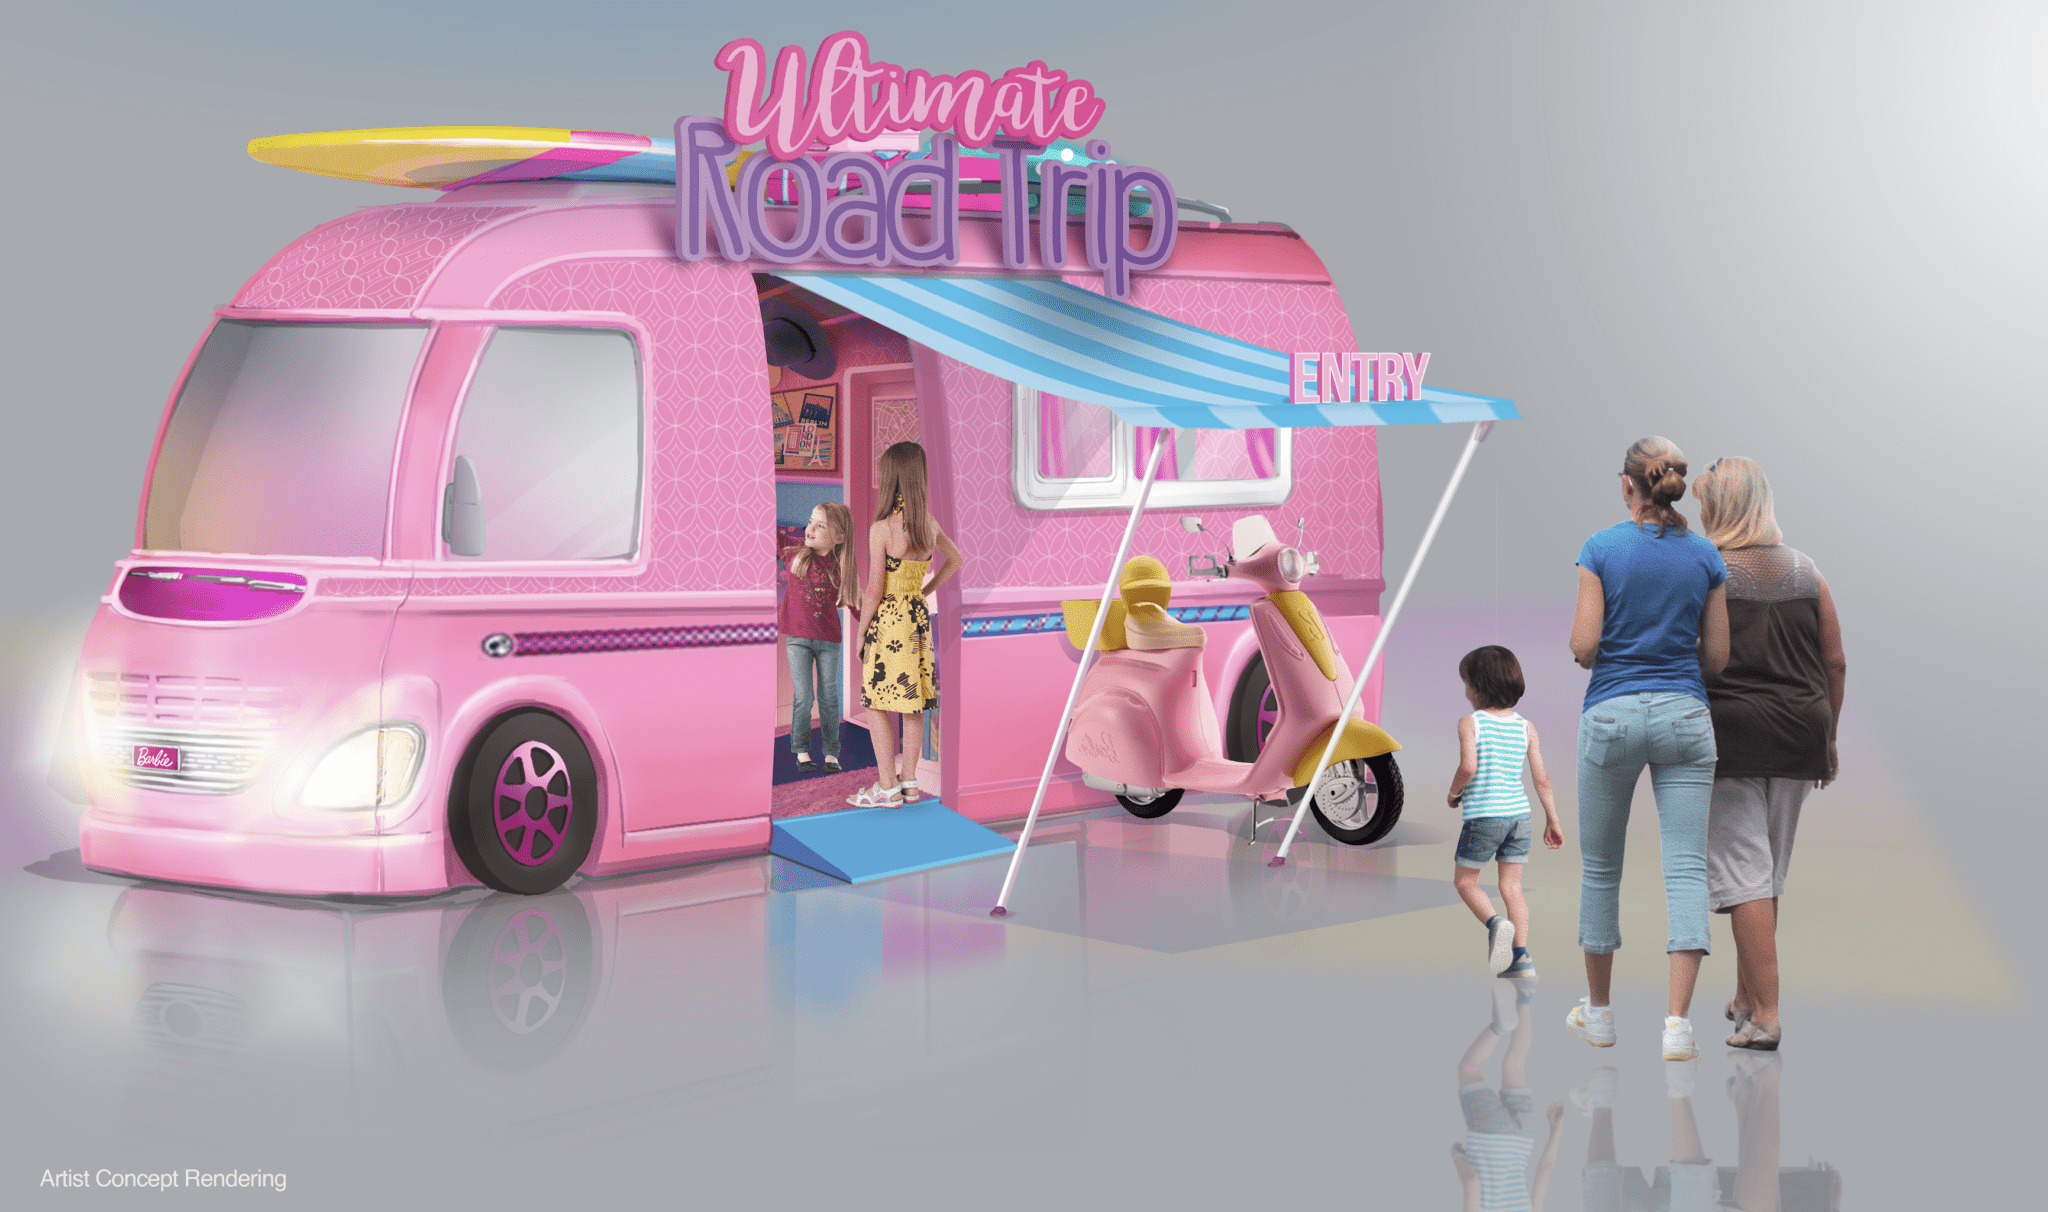 Mattel Barbie Creative Concept that says Ultimate Road Trip above